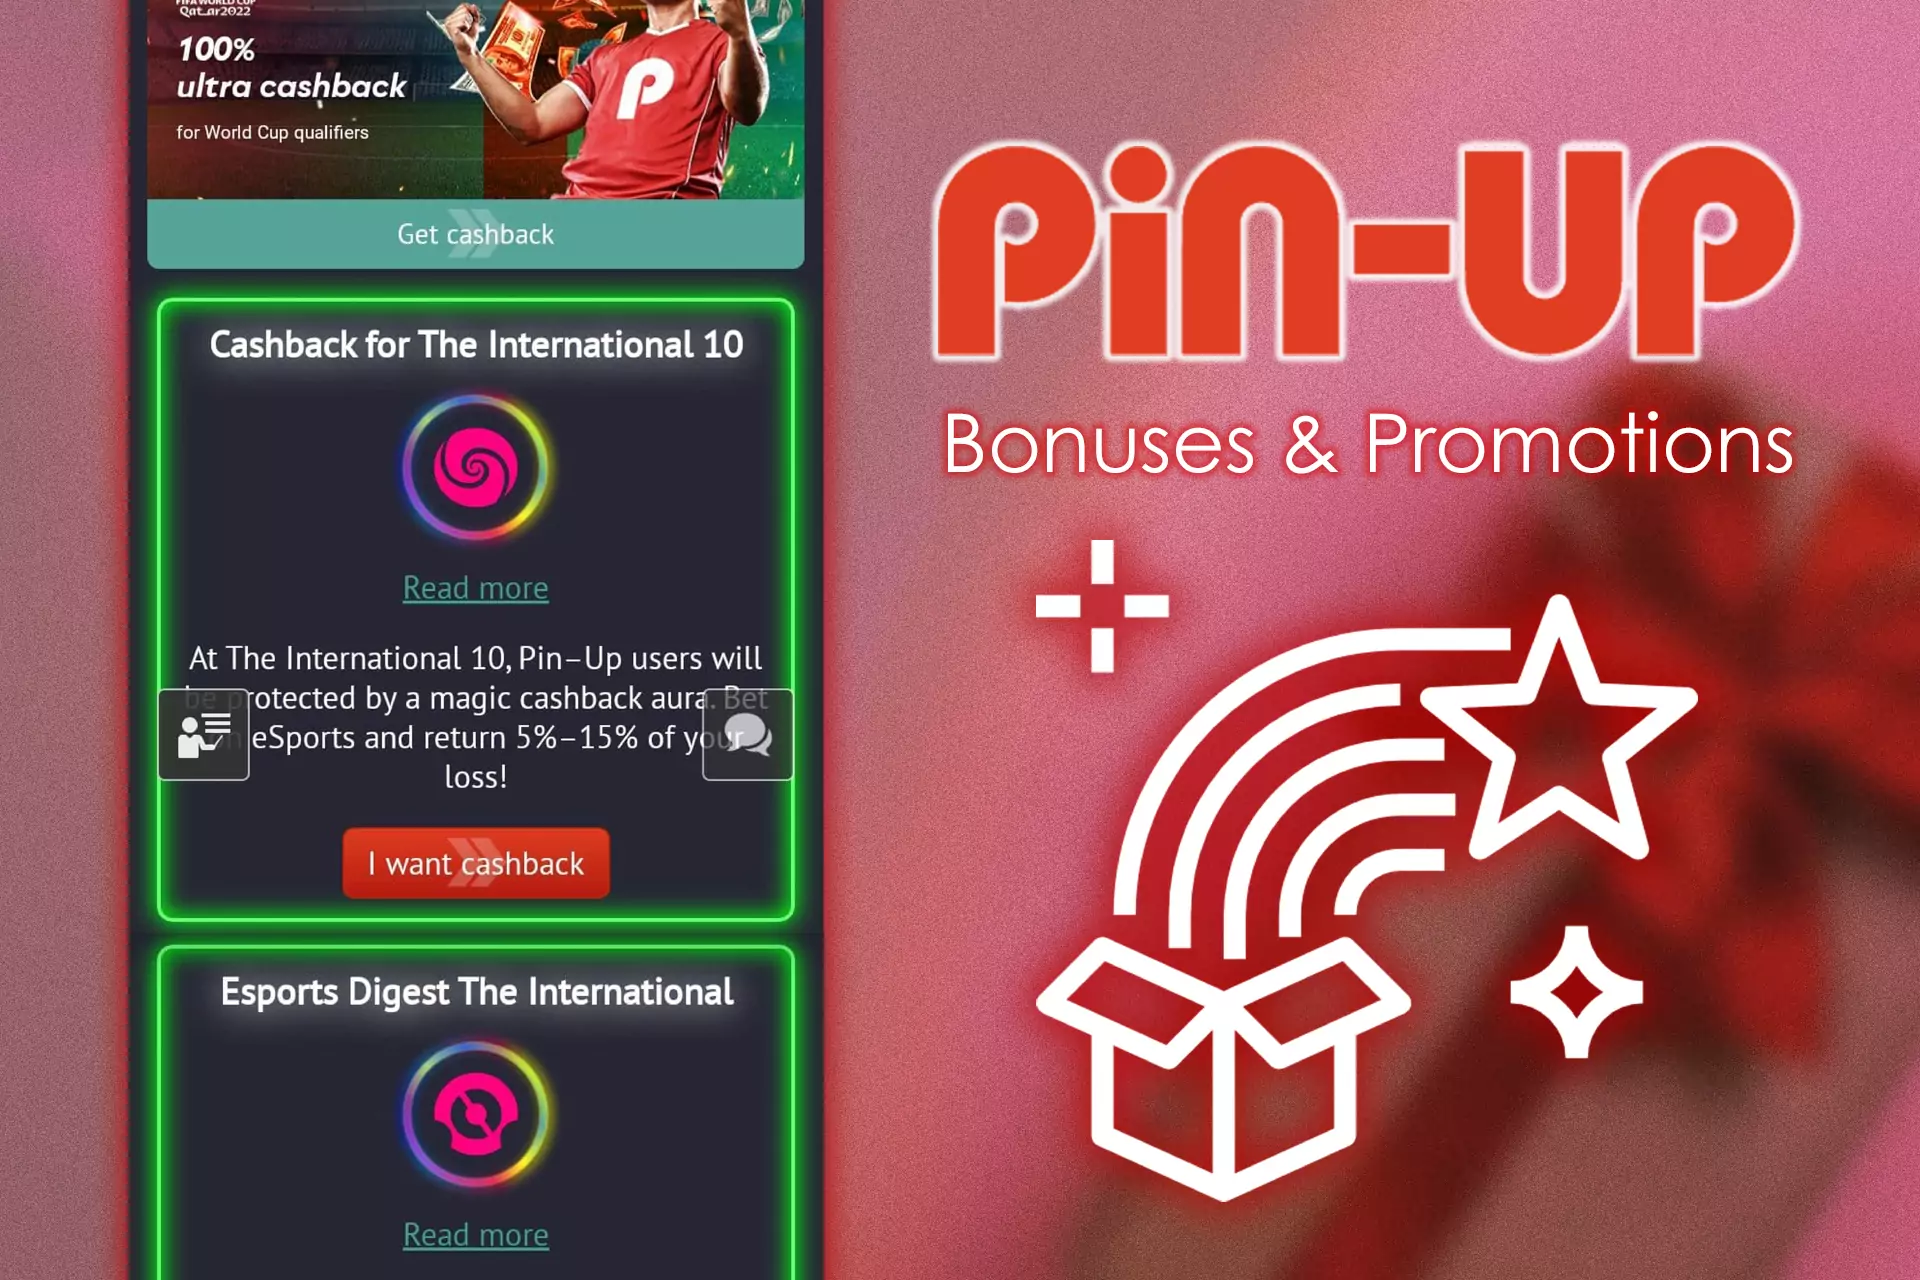 There are lots of bonuses and promotions you can receive from the Pin-Up casino and use for betting.